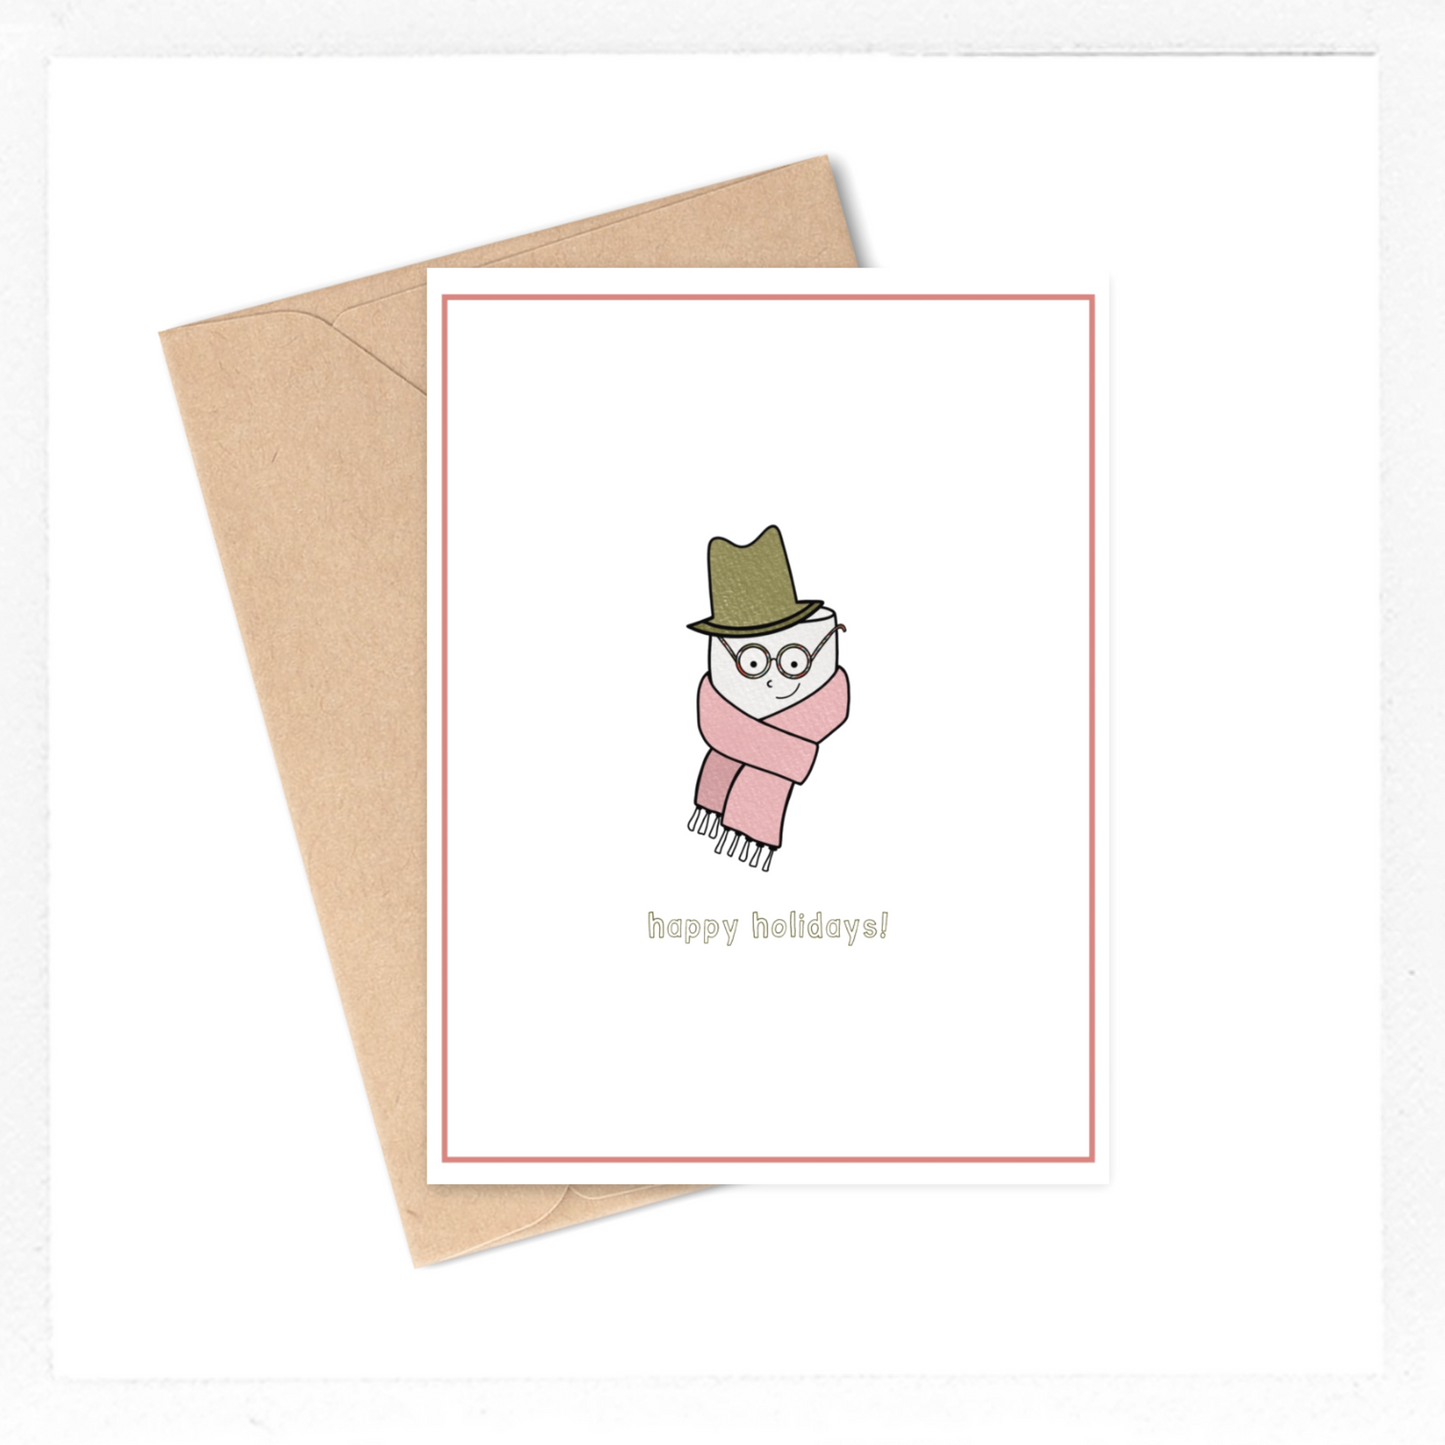 This holiday card features a drawing of a cute little marshmallow man with a scarf and a top hat with the text 'happy holidays!"